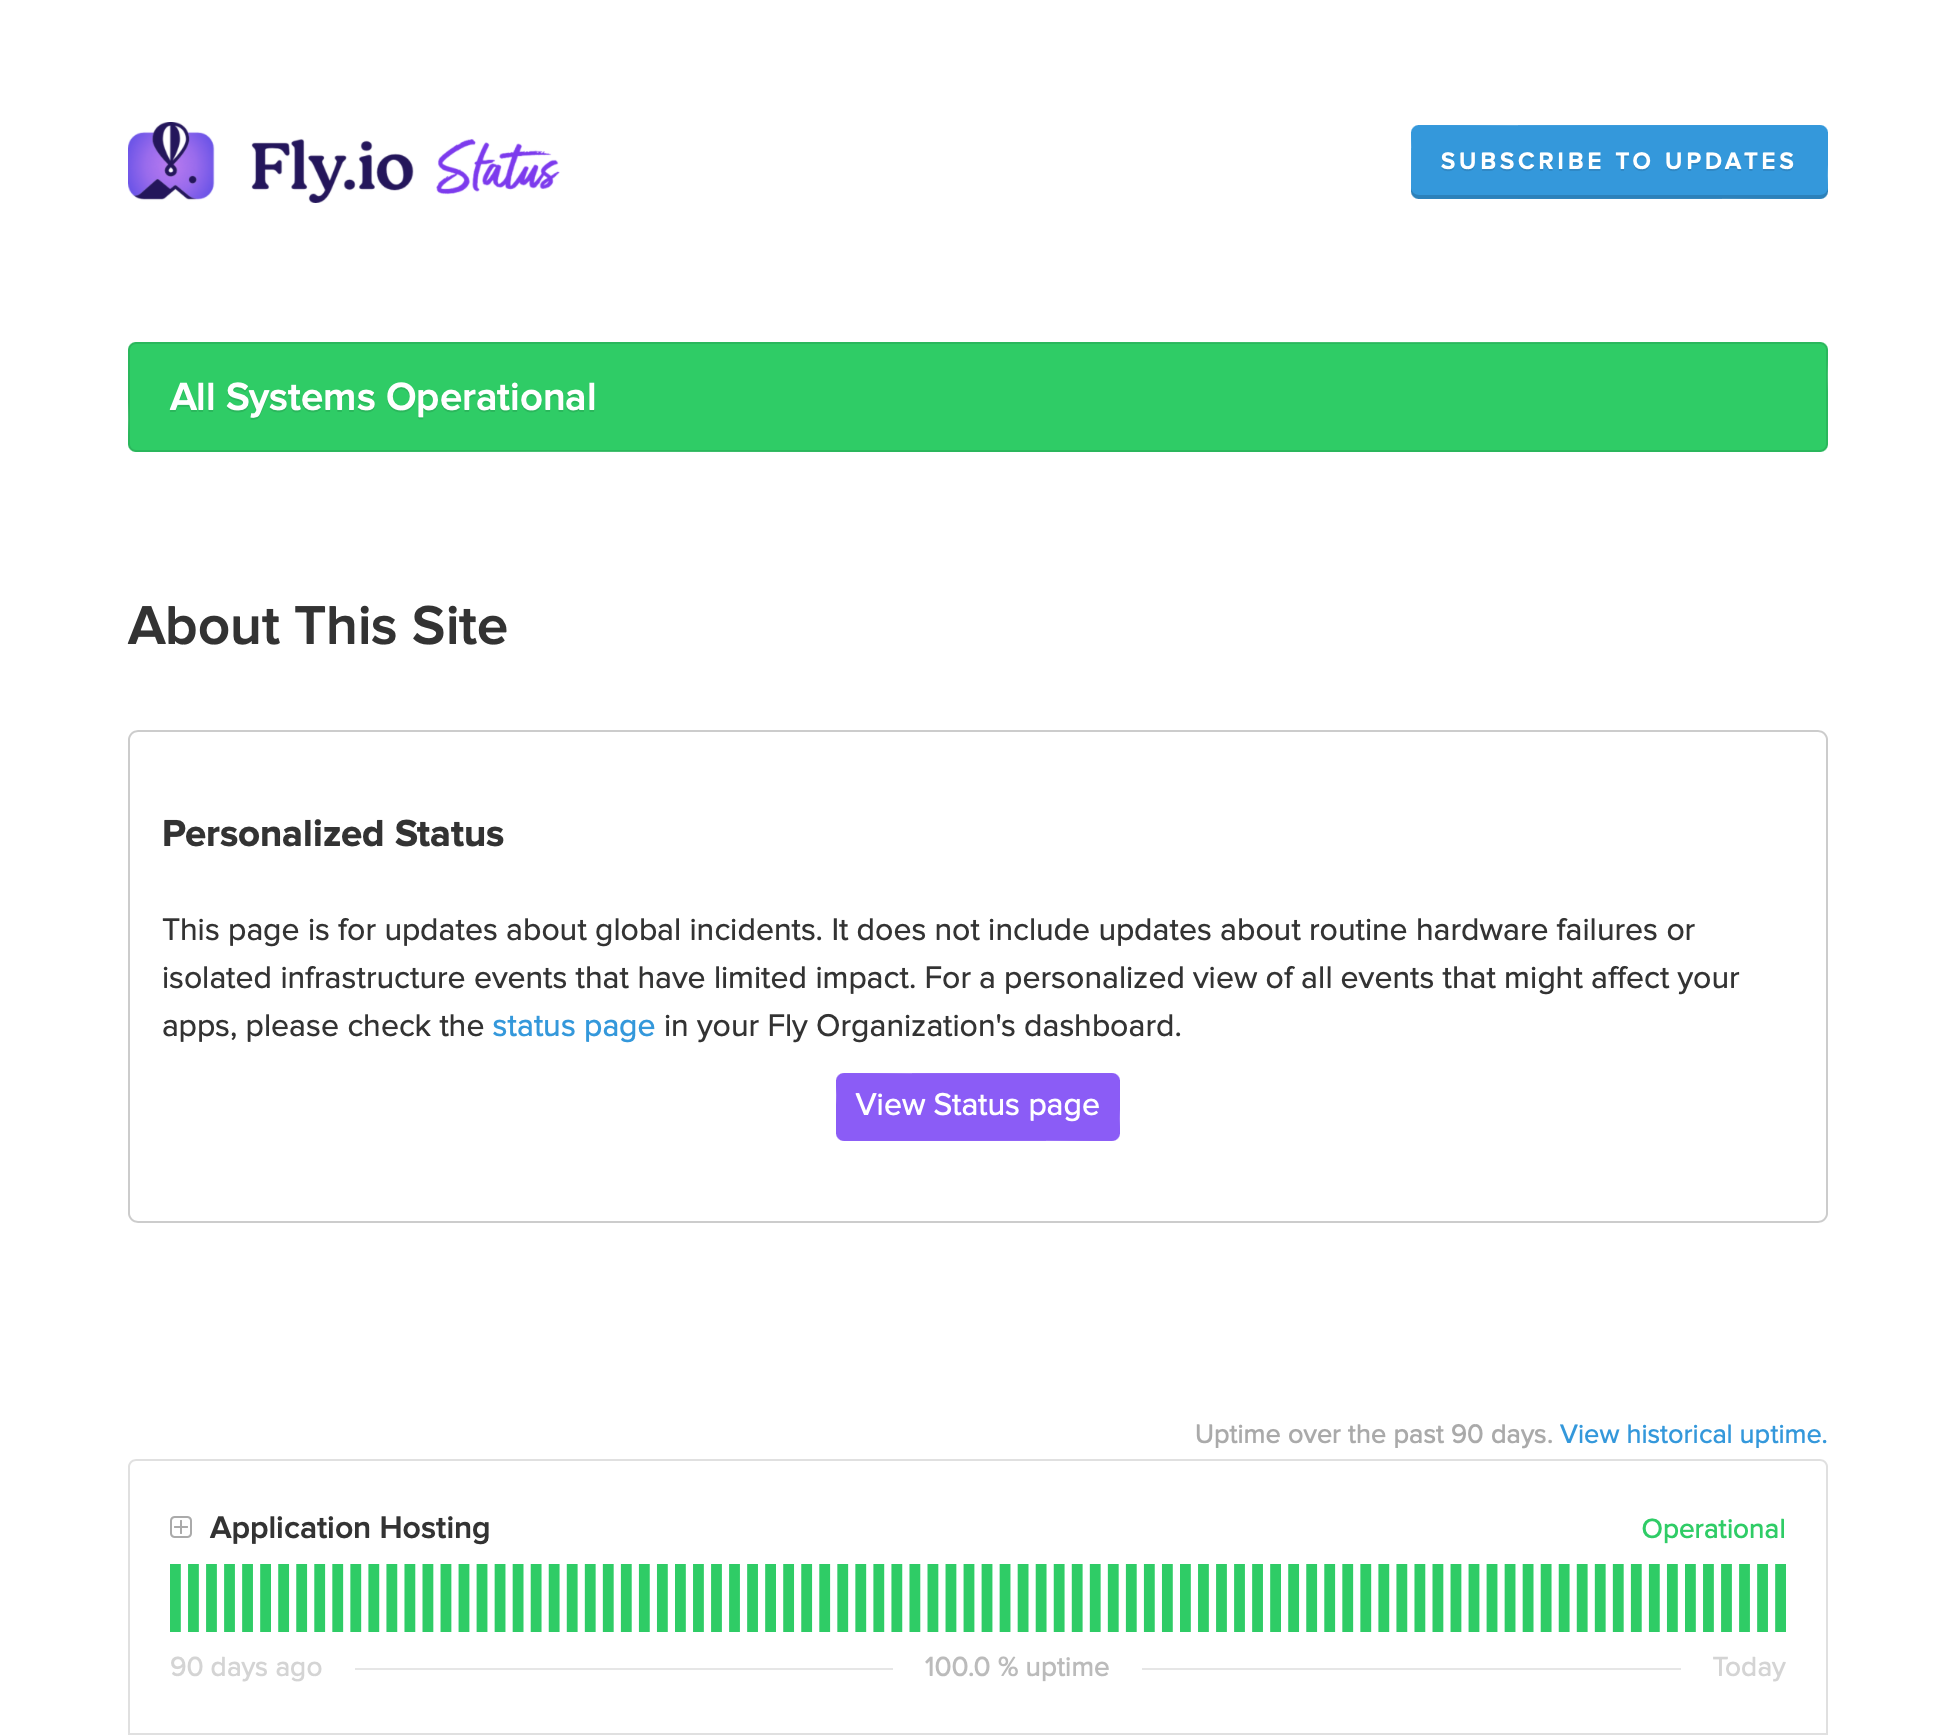 Fly.io status page